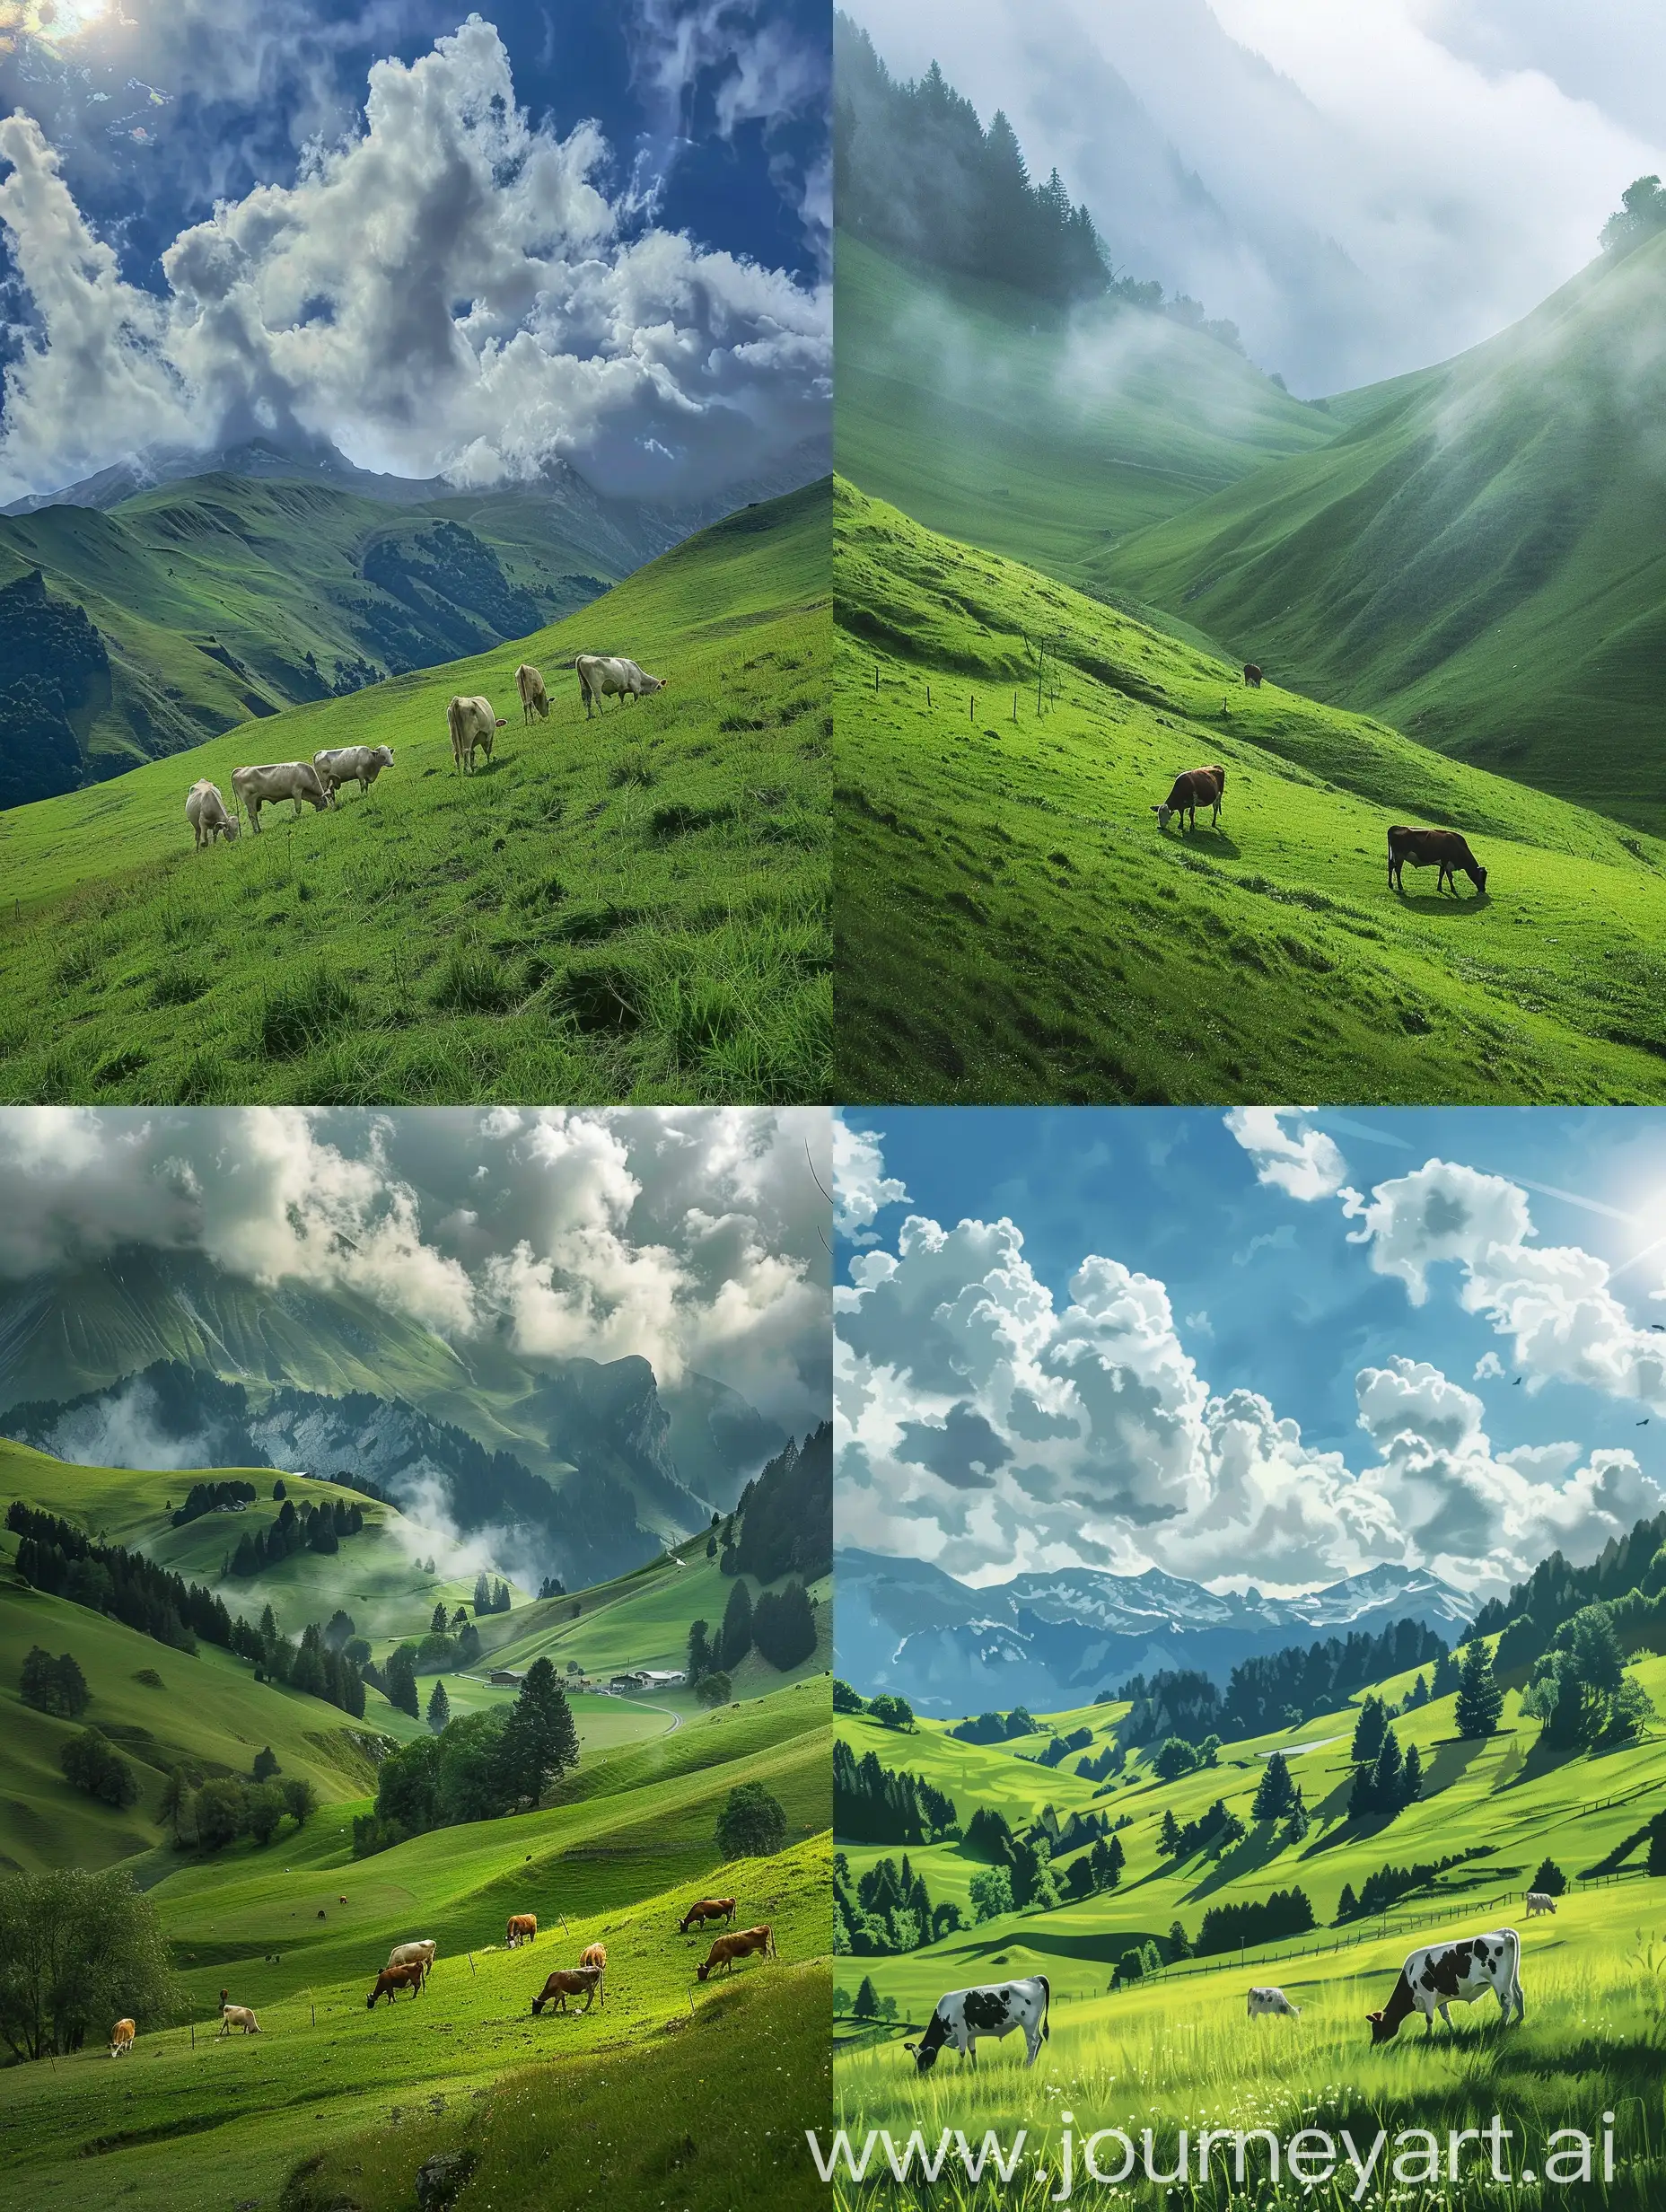 Switzerland Nature scene,hilly slopes,greenery beautiful fluffy sky,cows are eating grass,peaceful,professionally captured view,fresh air feel,beautiful small grass.